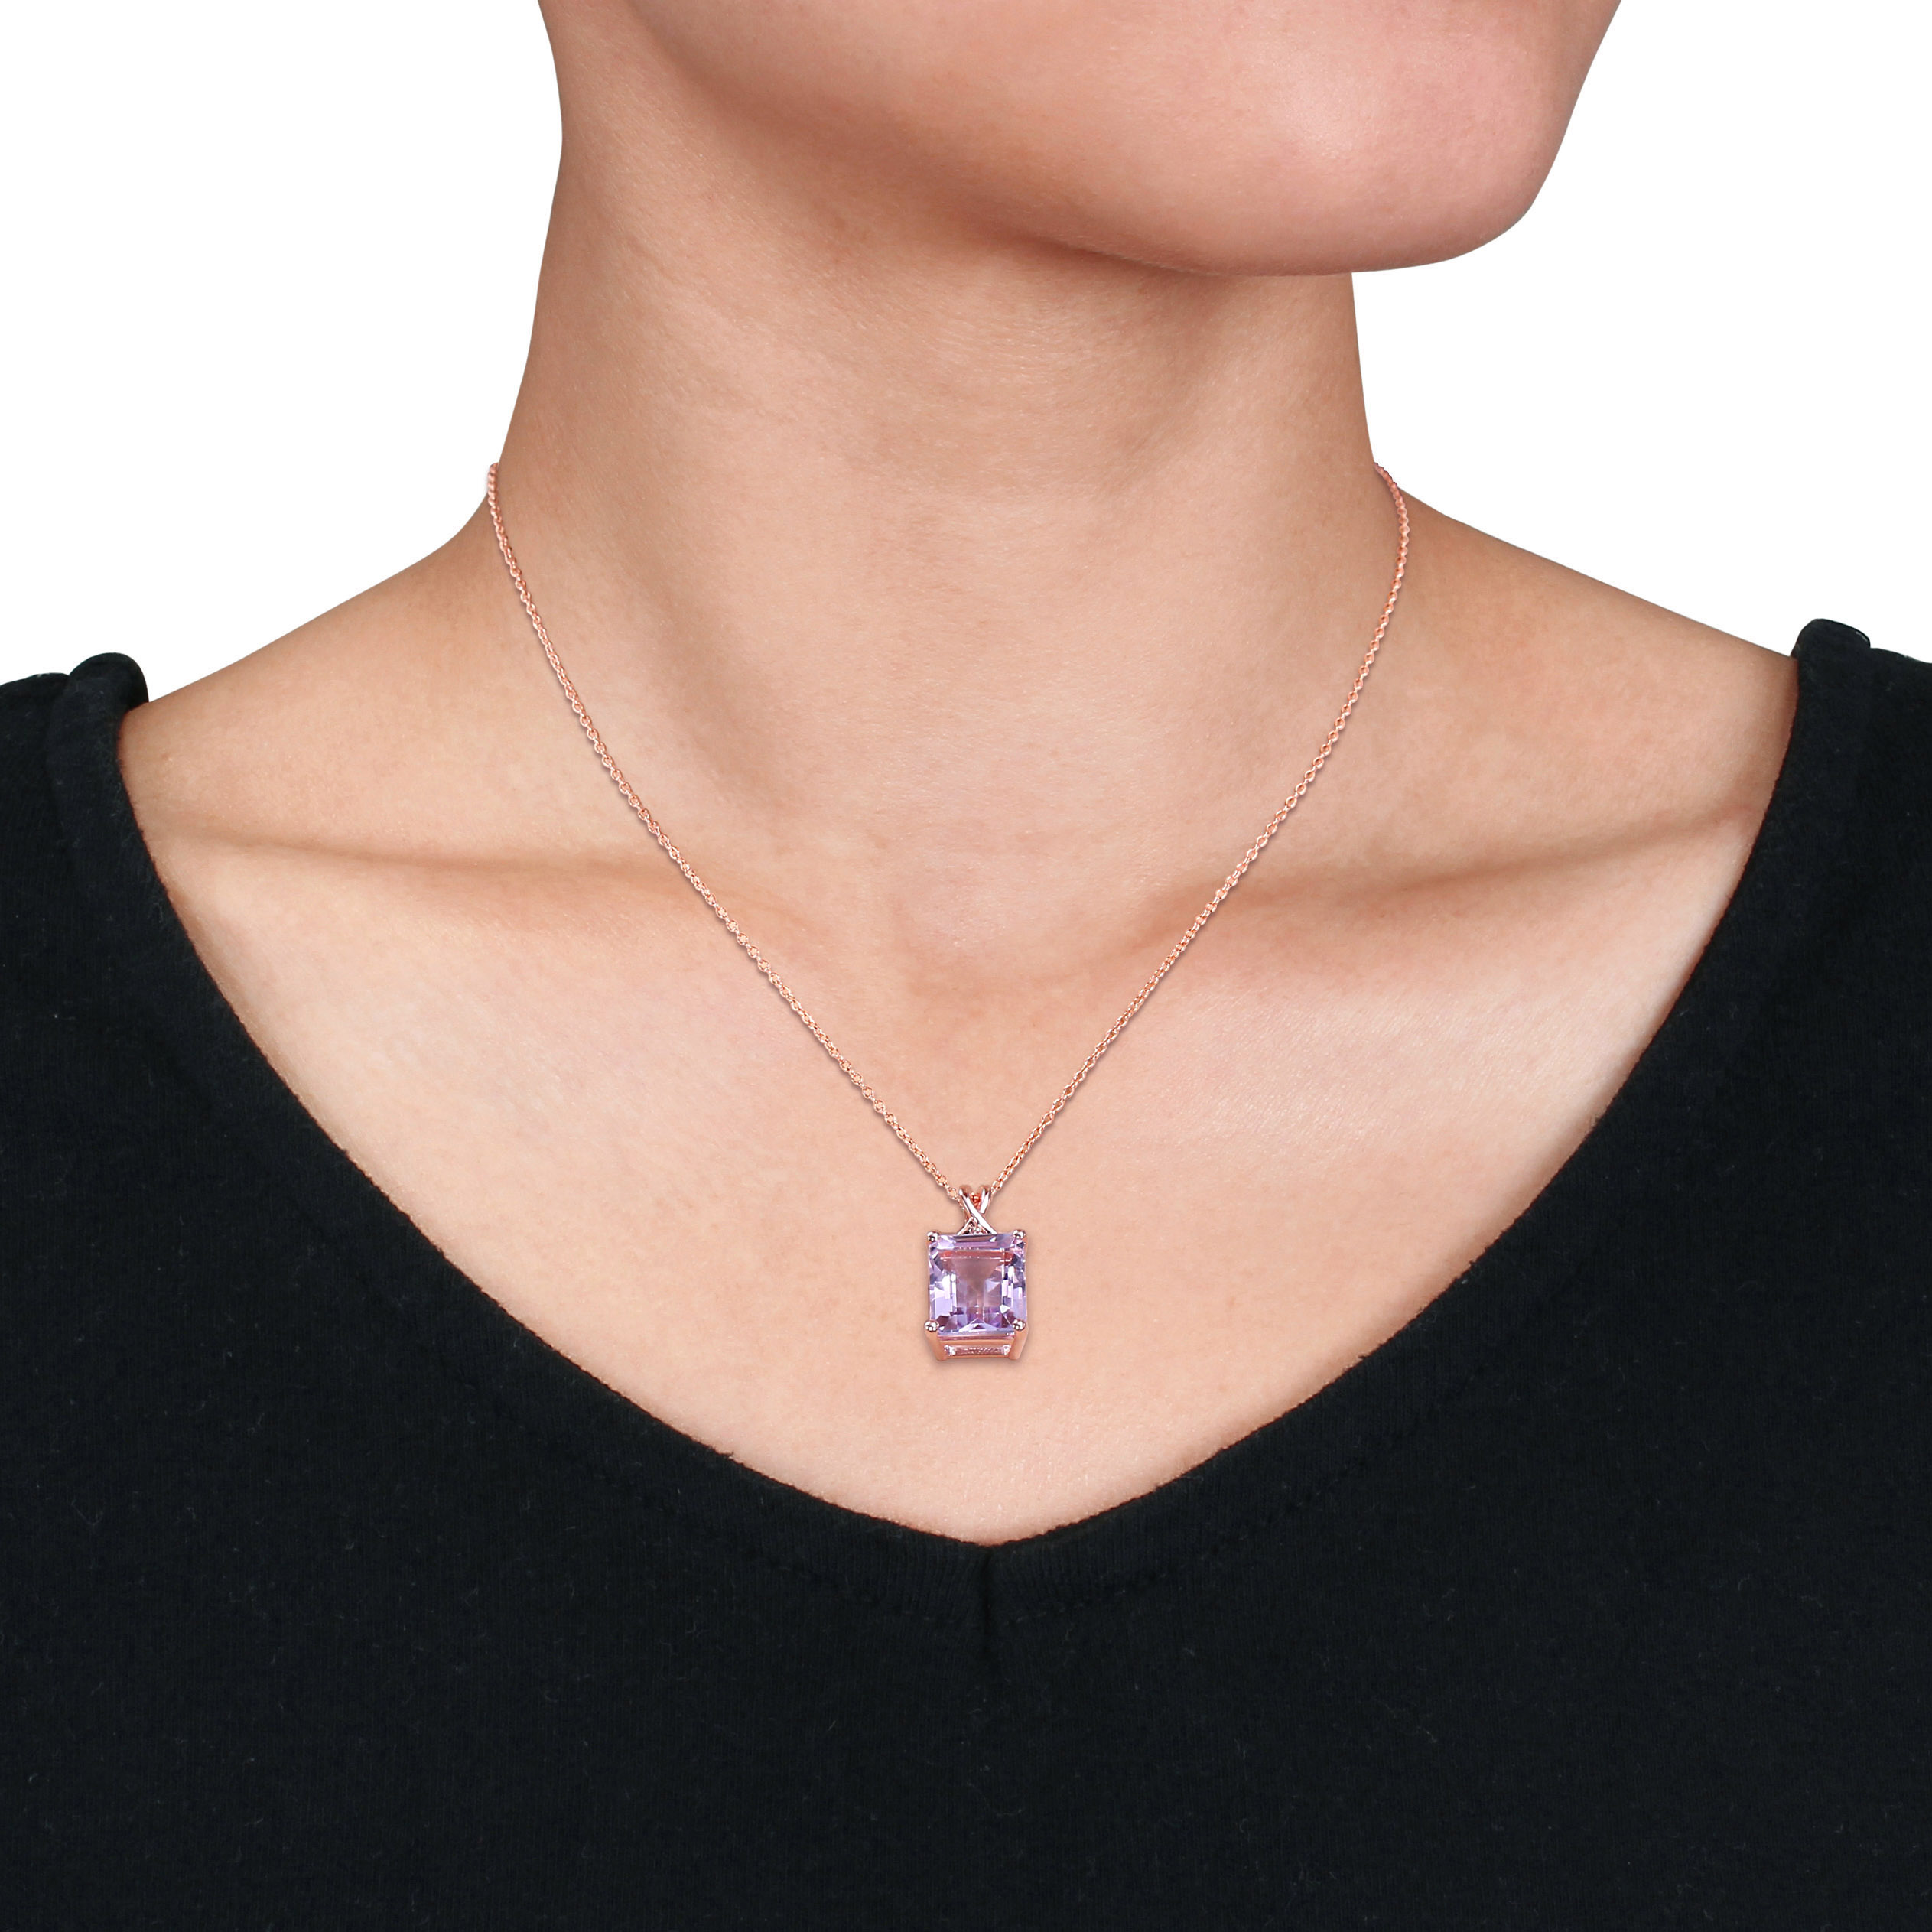 5/8 CT TGW Octagon Rose de France and White Topaz Pendant with Chain in Rose Plated Sterling Silver - 18 in.